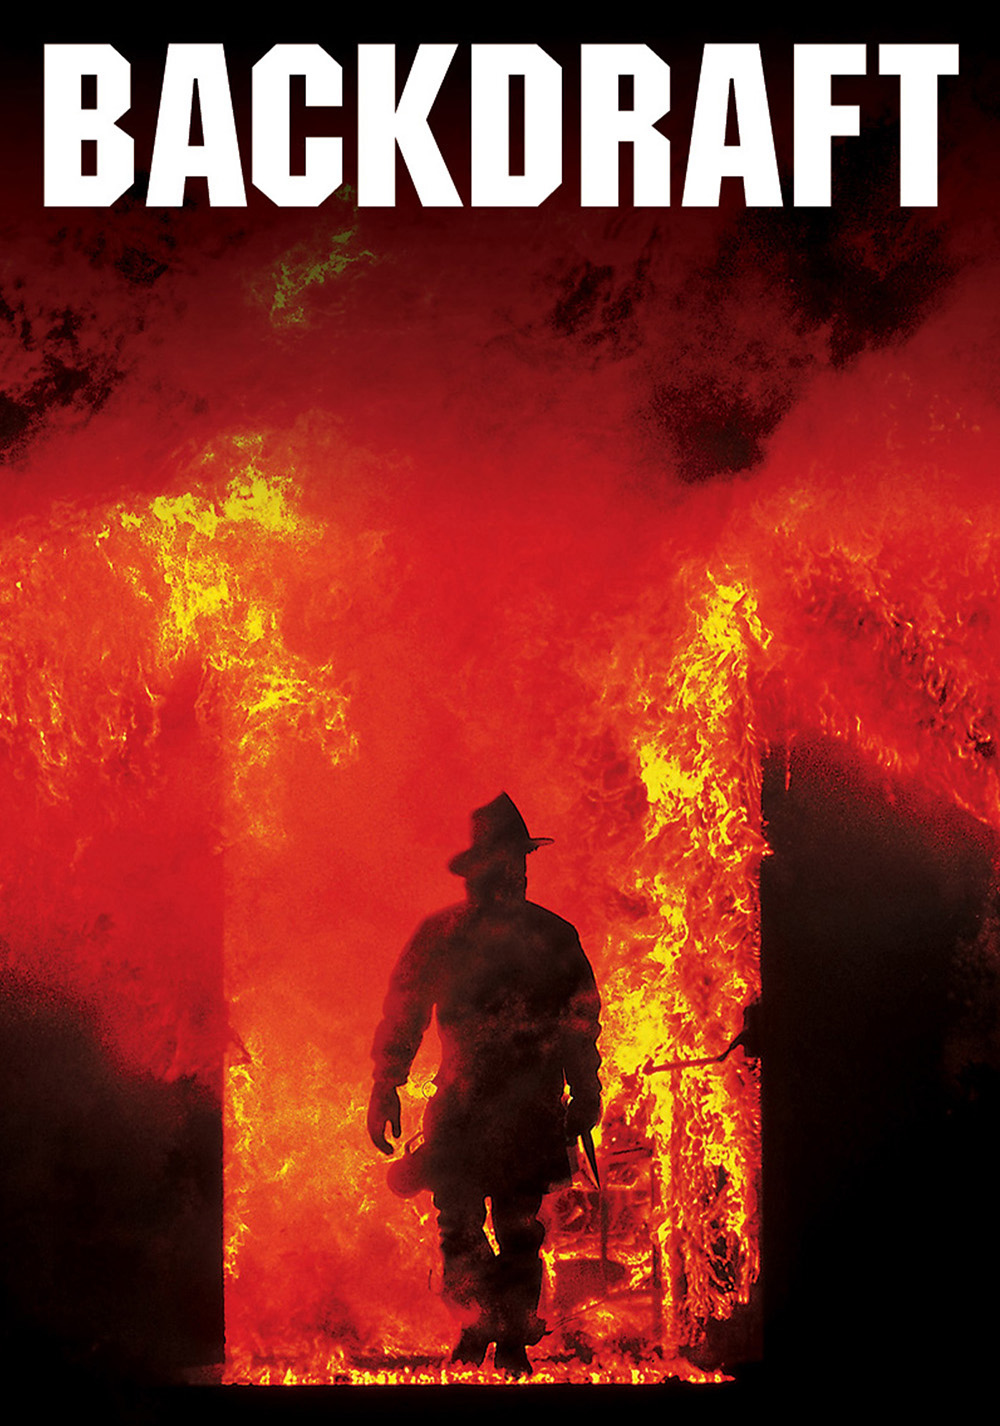 View, Download, Rate, and Comment on this Backdraft Movie Poster.